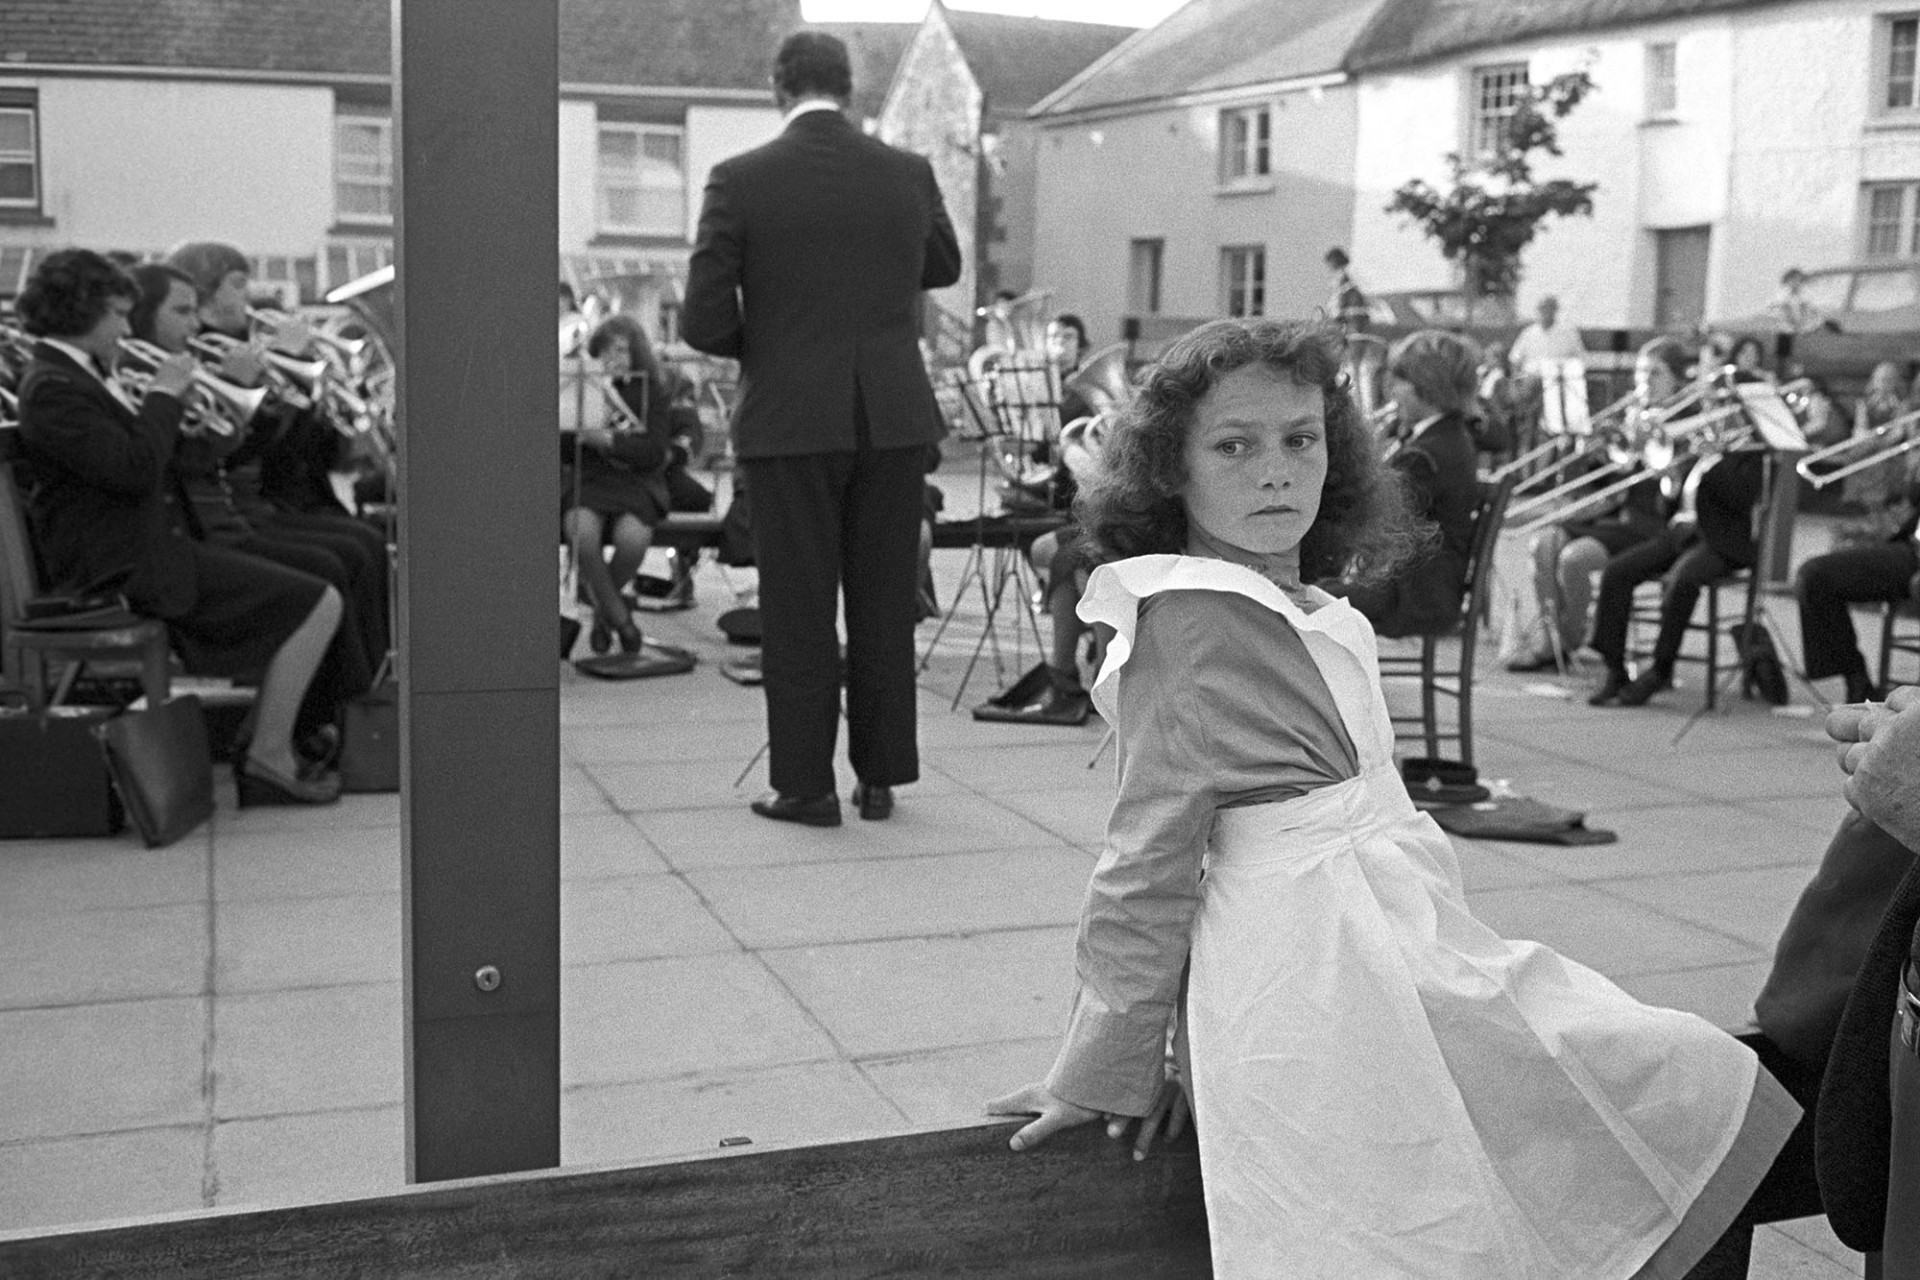 Floral dance. Girl sitting in costume, band playing behind.
[A girl in costume sitting on a wooden fence of railing at Hatherleigh Floral Dance.  The town band is playing in the background in the town square.]